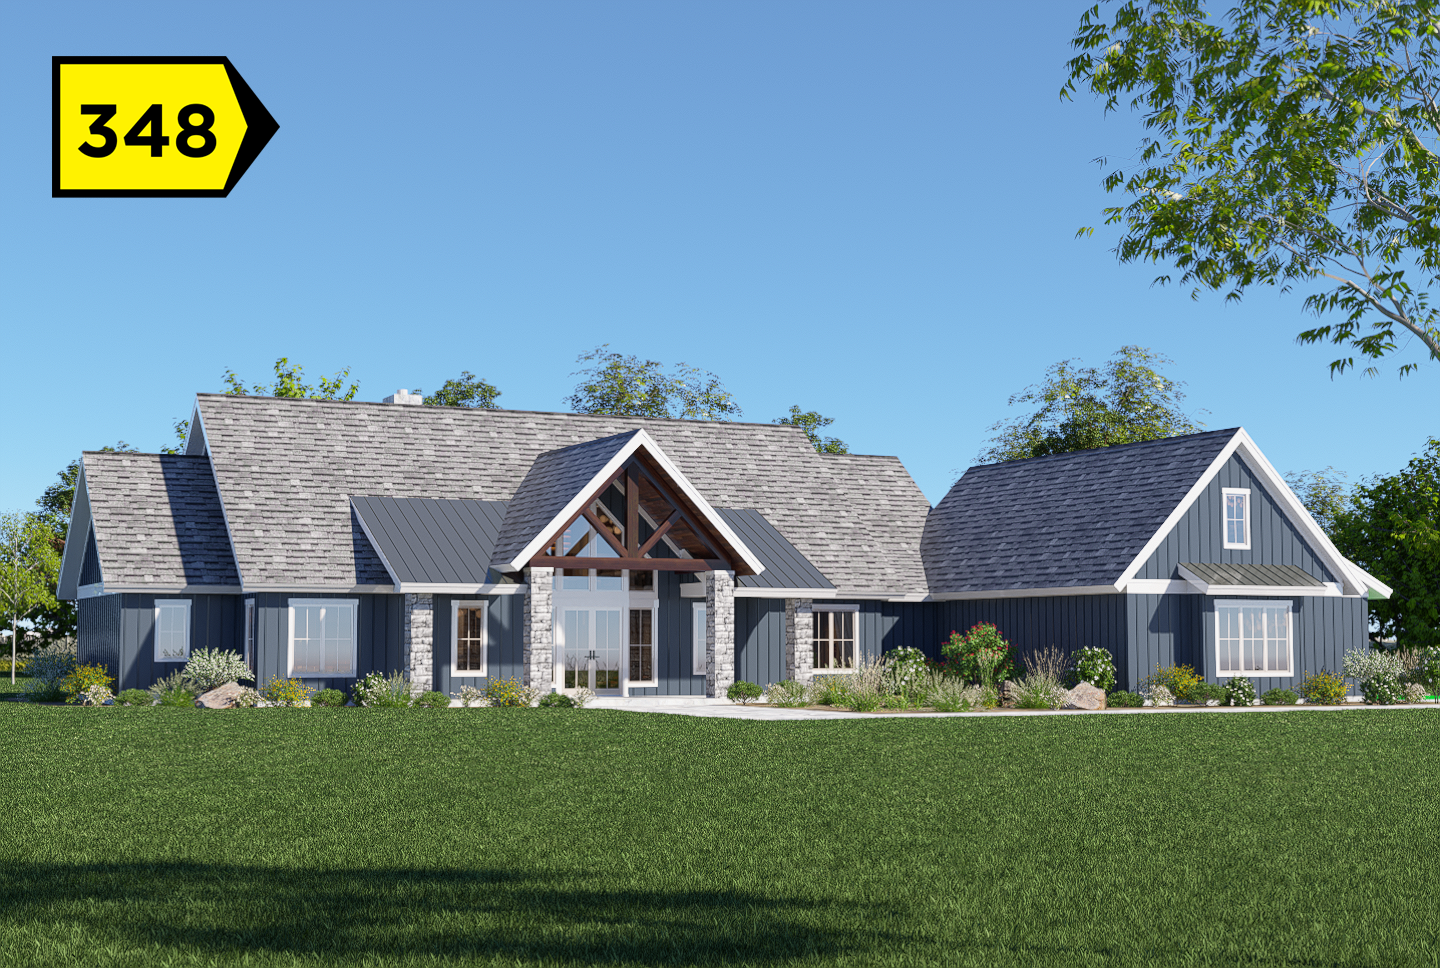 A 3d rendering of a ranch style home.